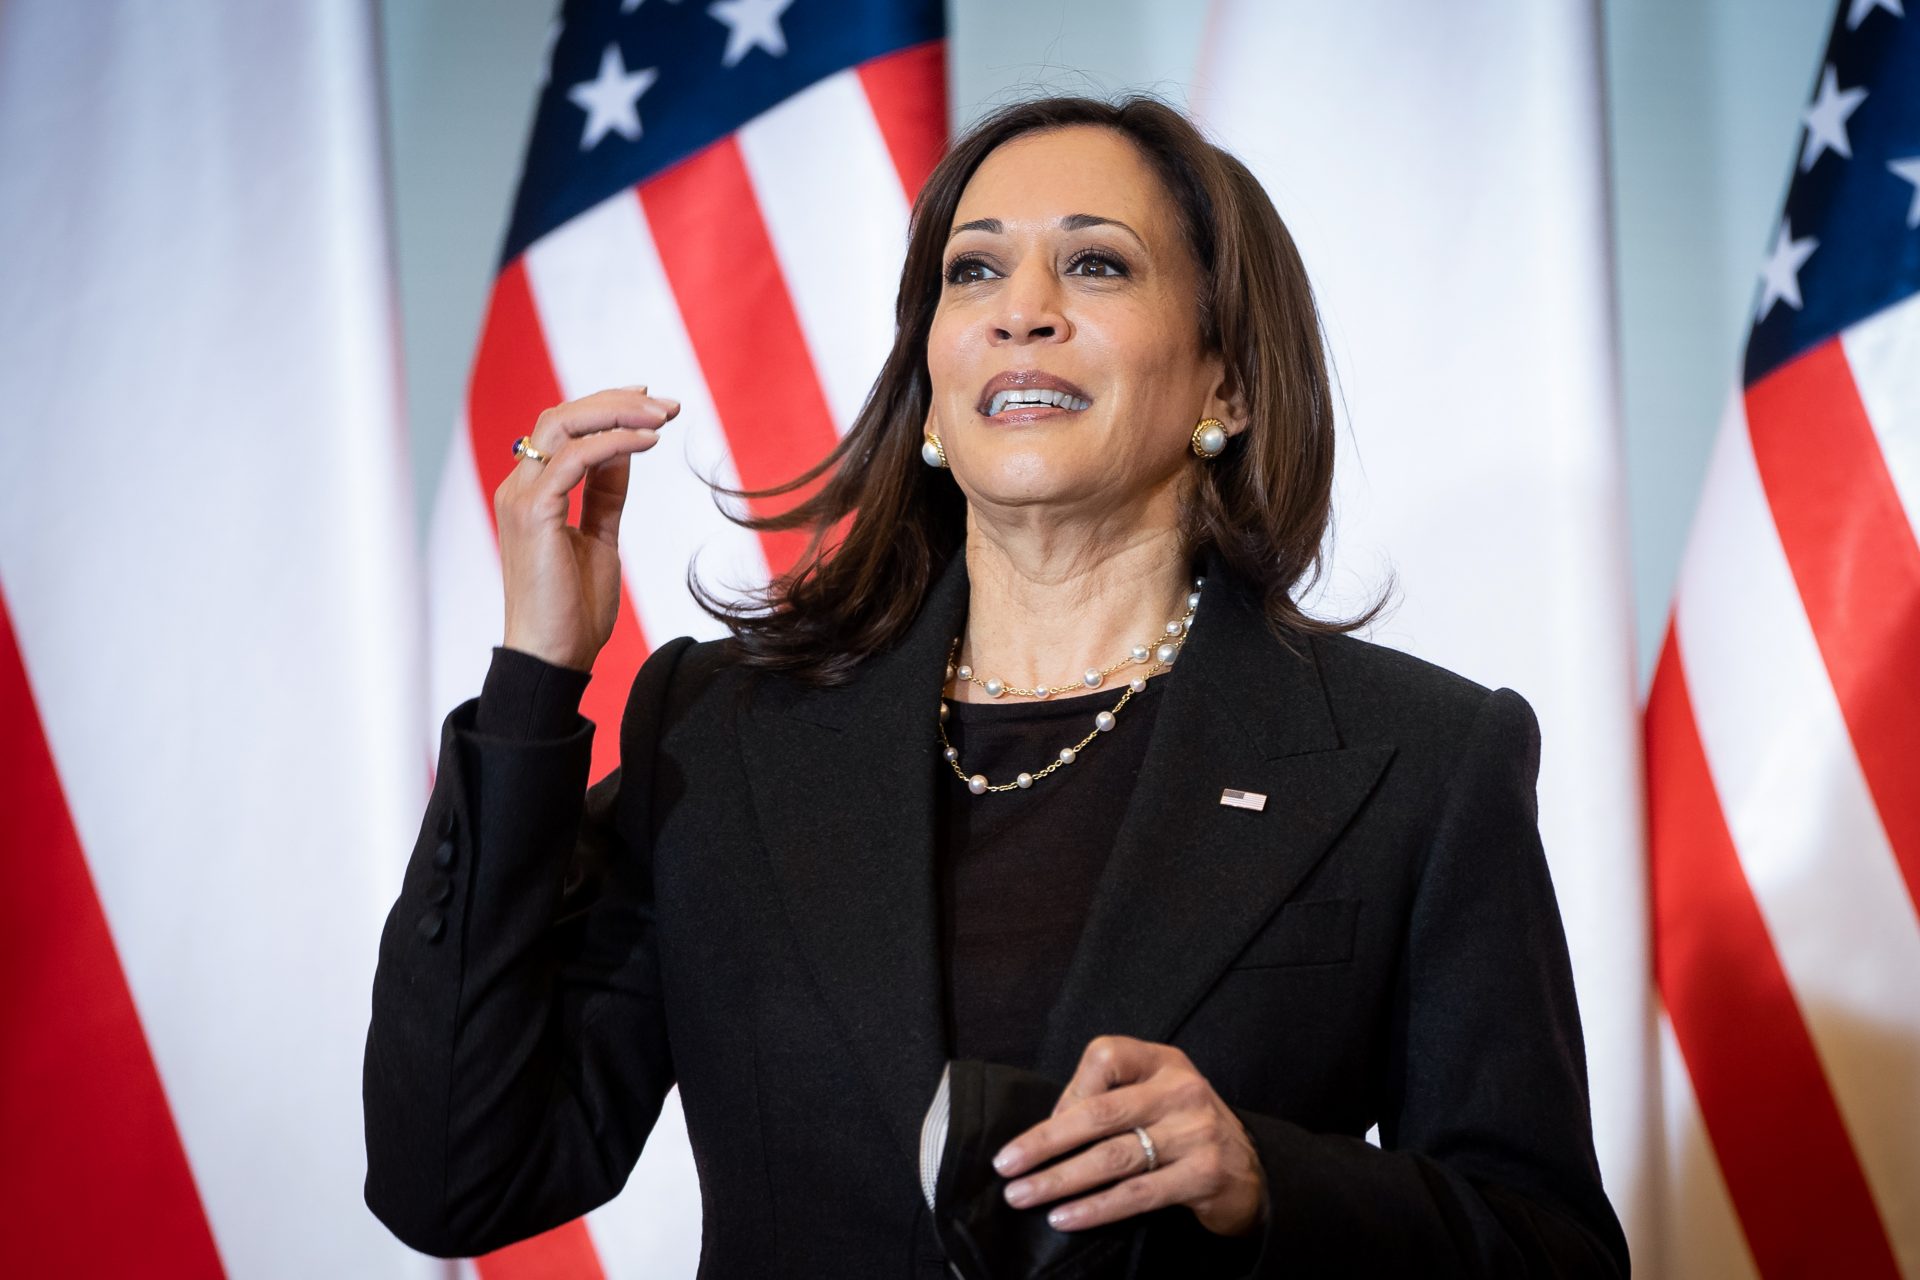 The Democrats who could challenge Kamala Harris for the nomination or become her running mate